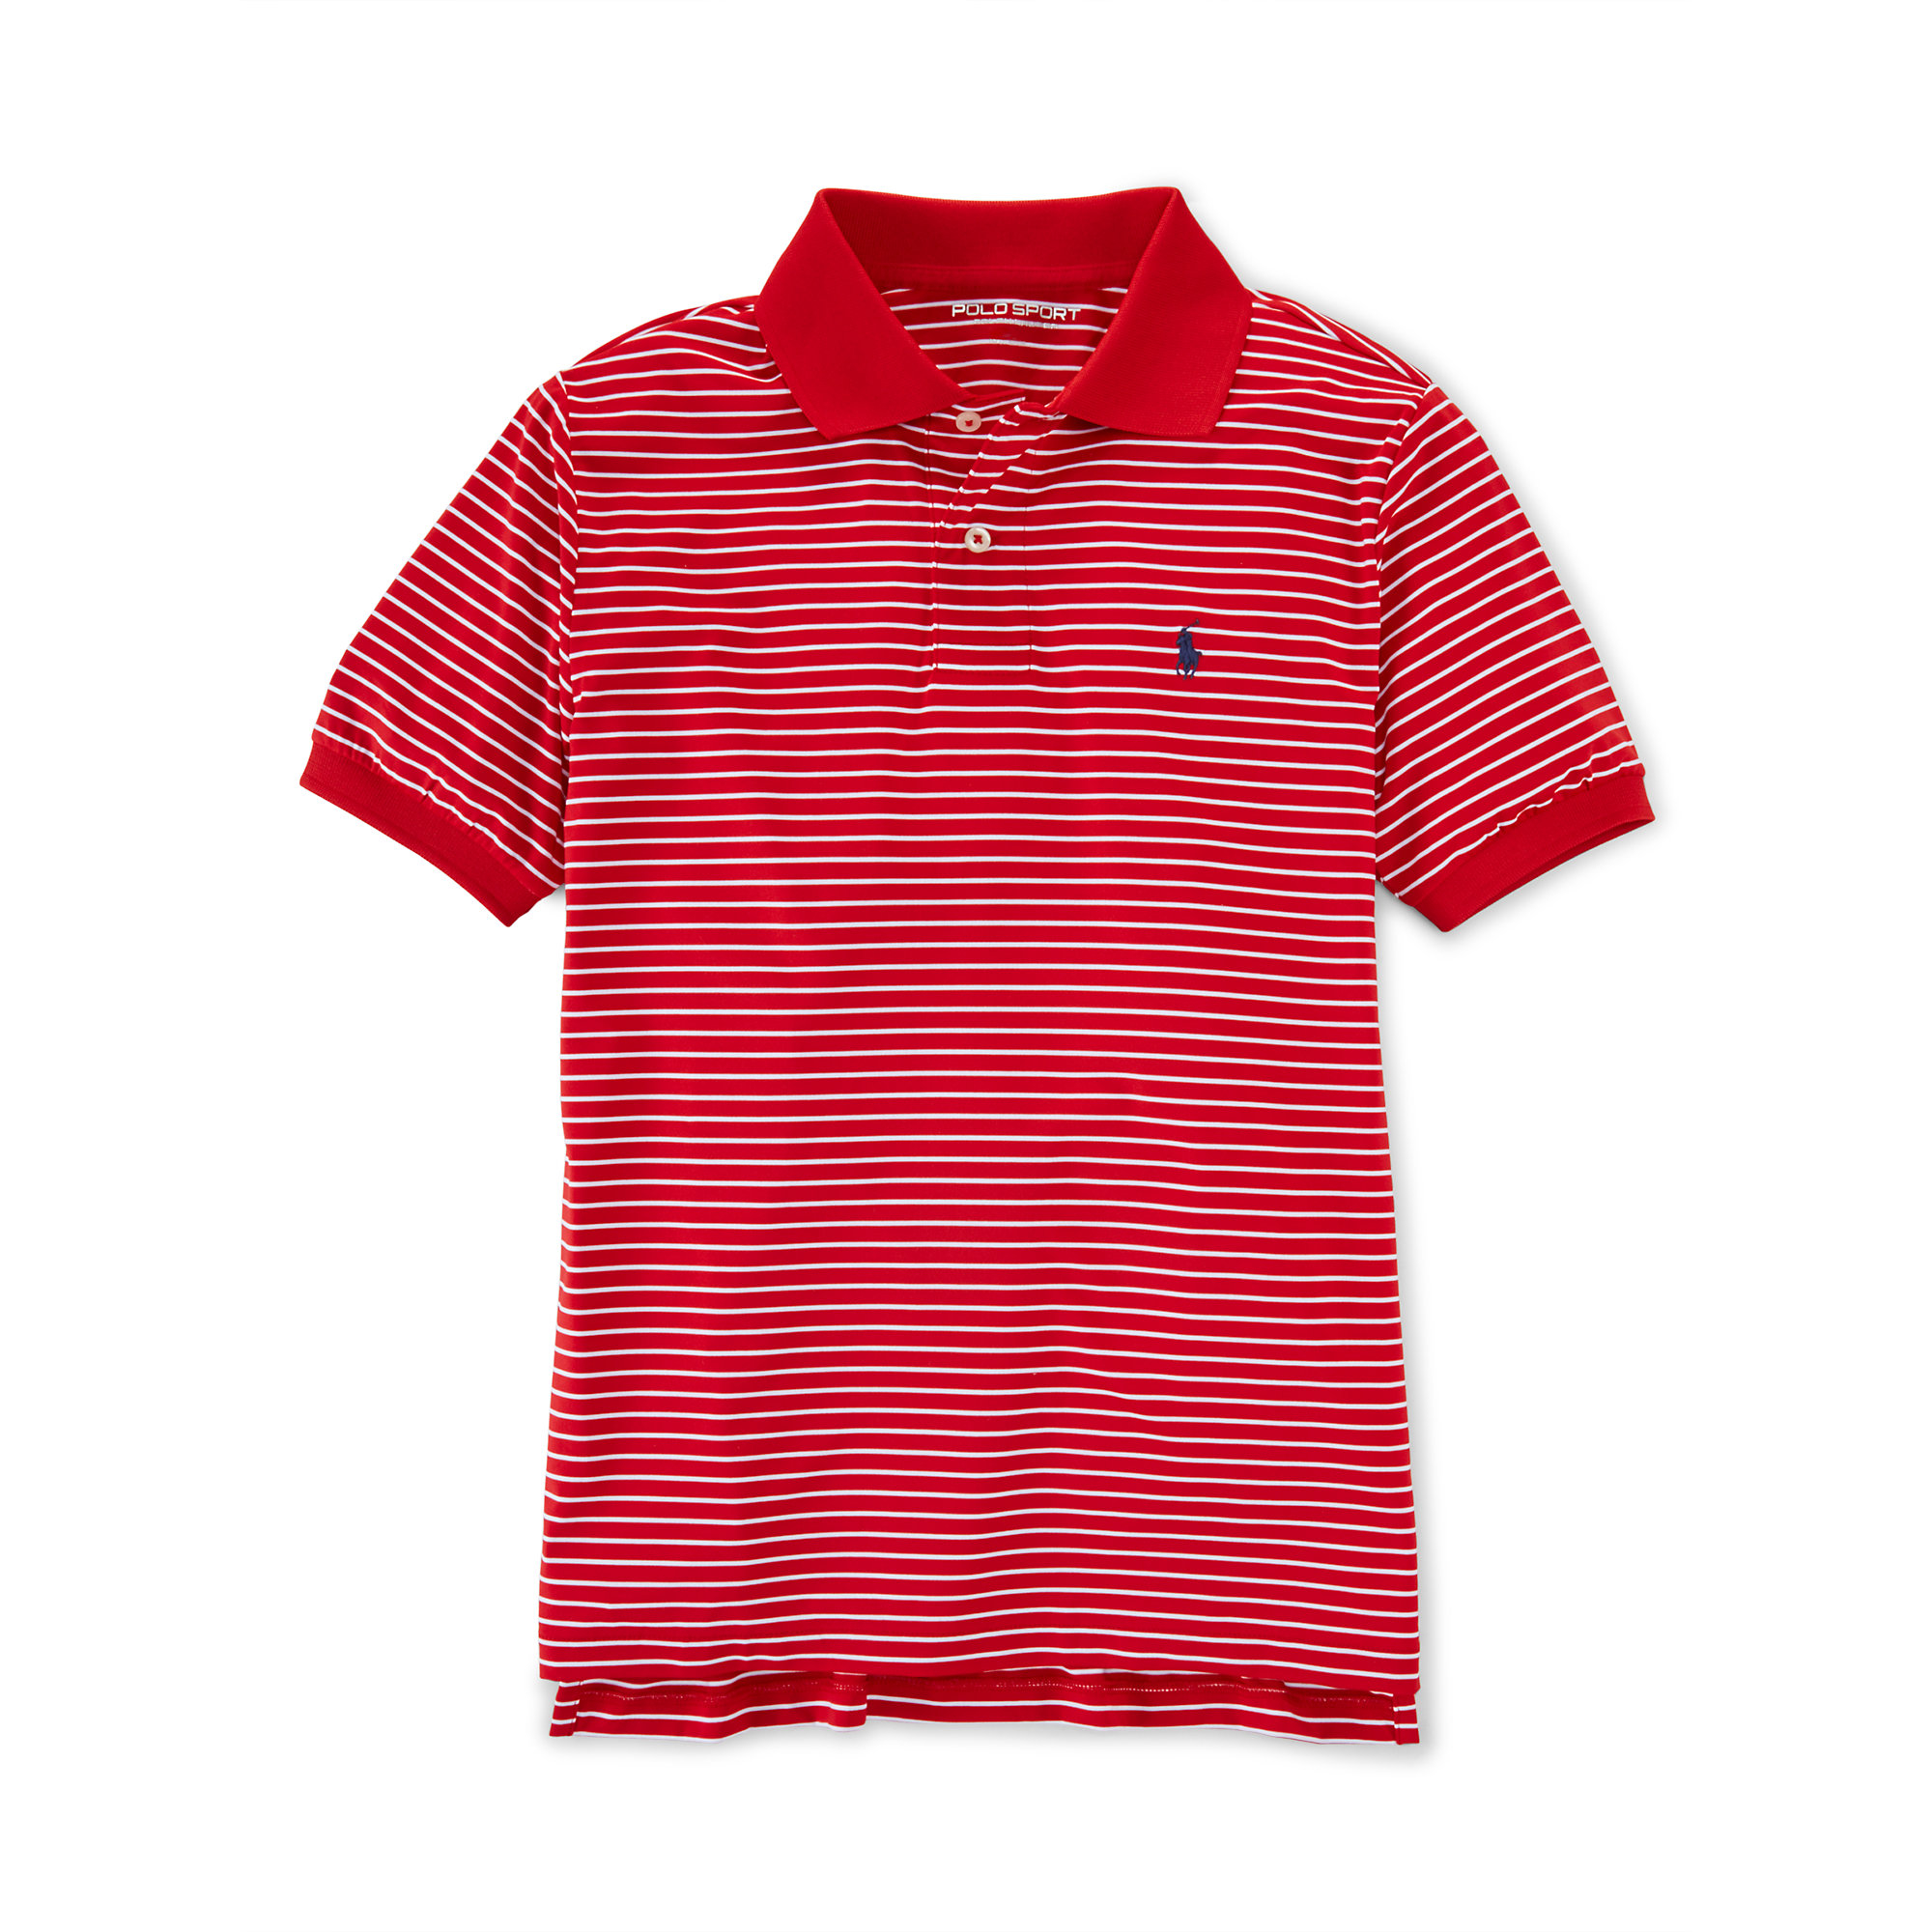 Ralph lauren Performance Striped Polo Shirt in Red | Lyst